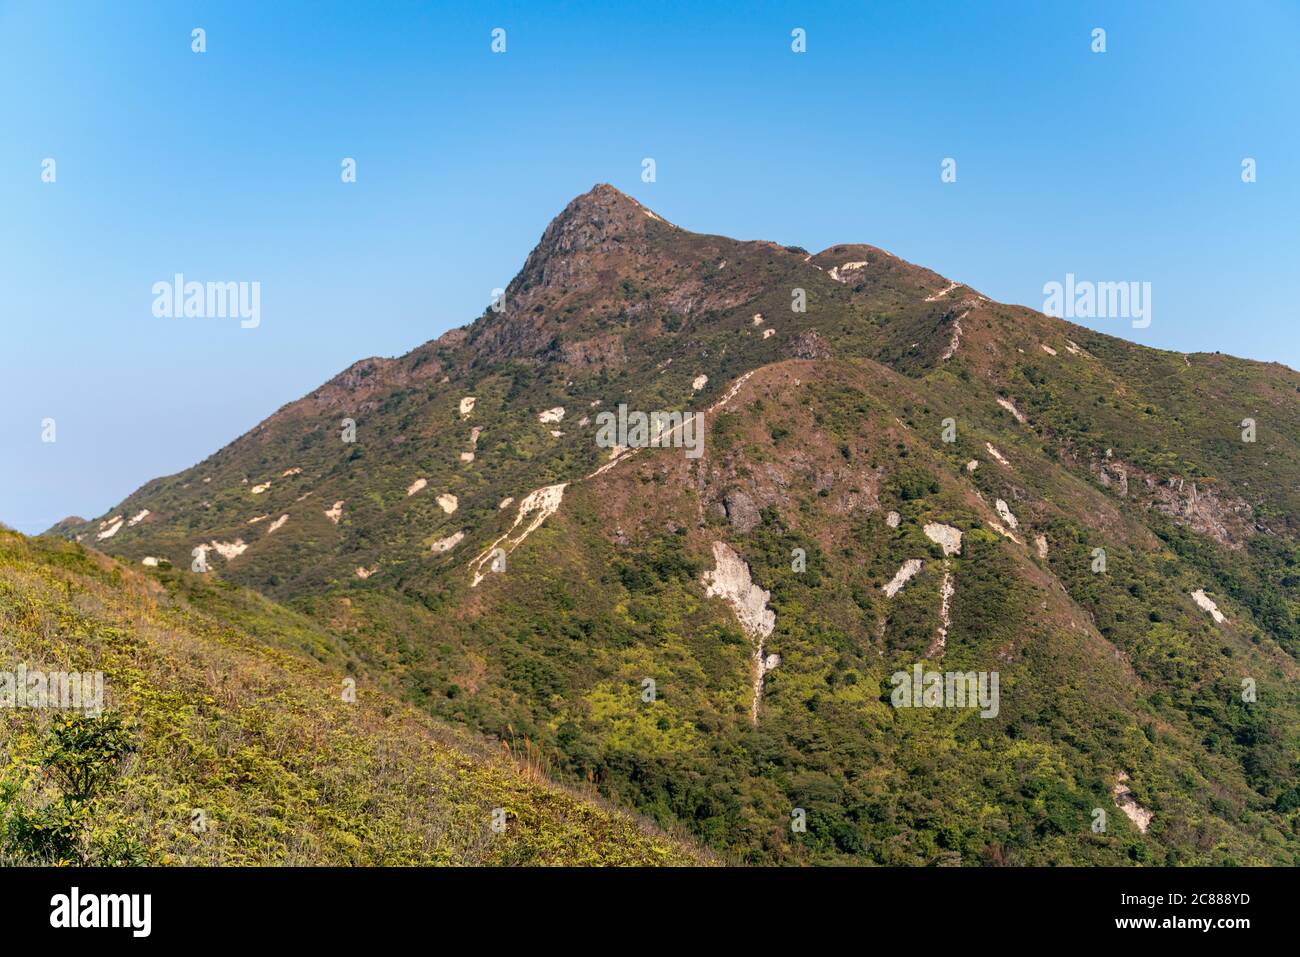 The amazing nature view from Sharp Peak in Sai Kung East Country Park in Hong Kong Stock Photo